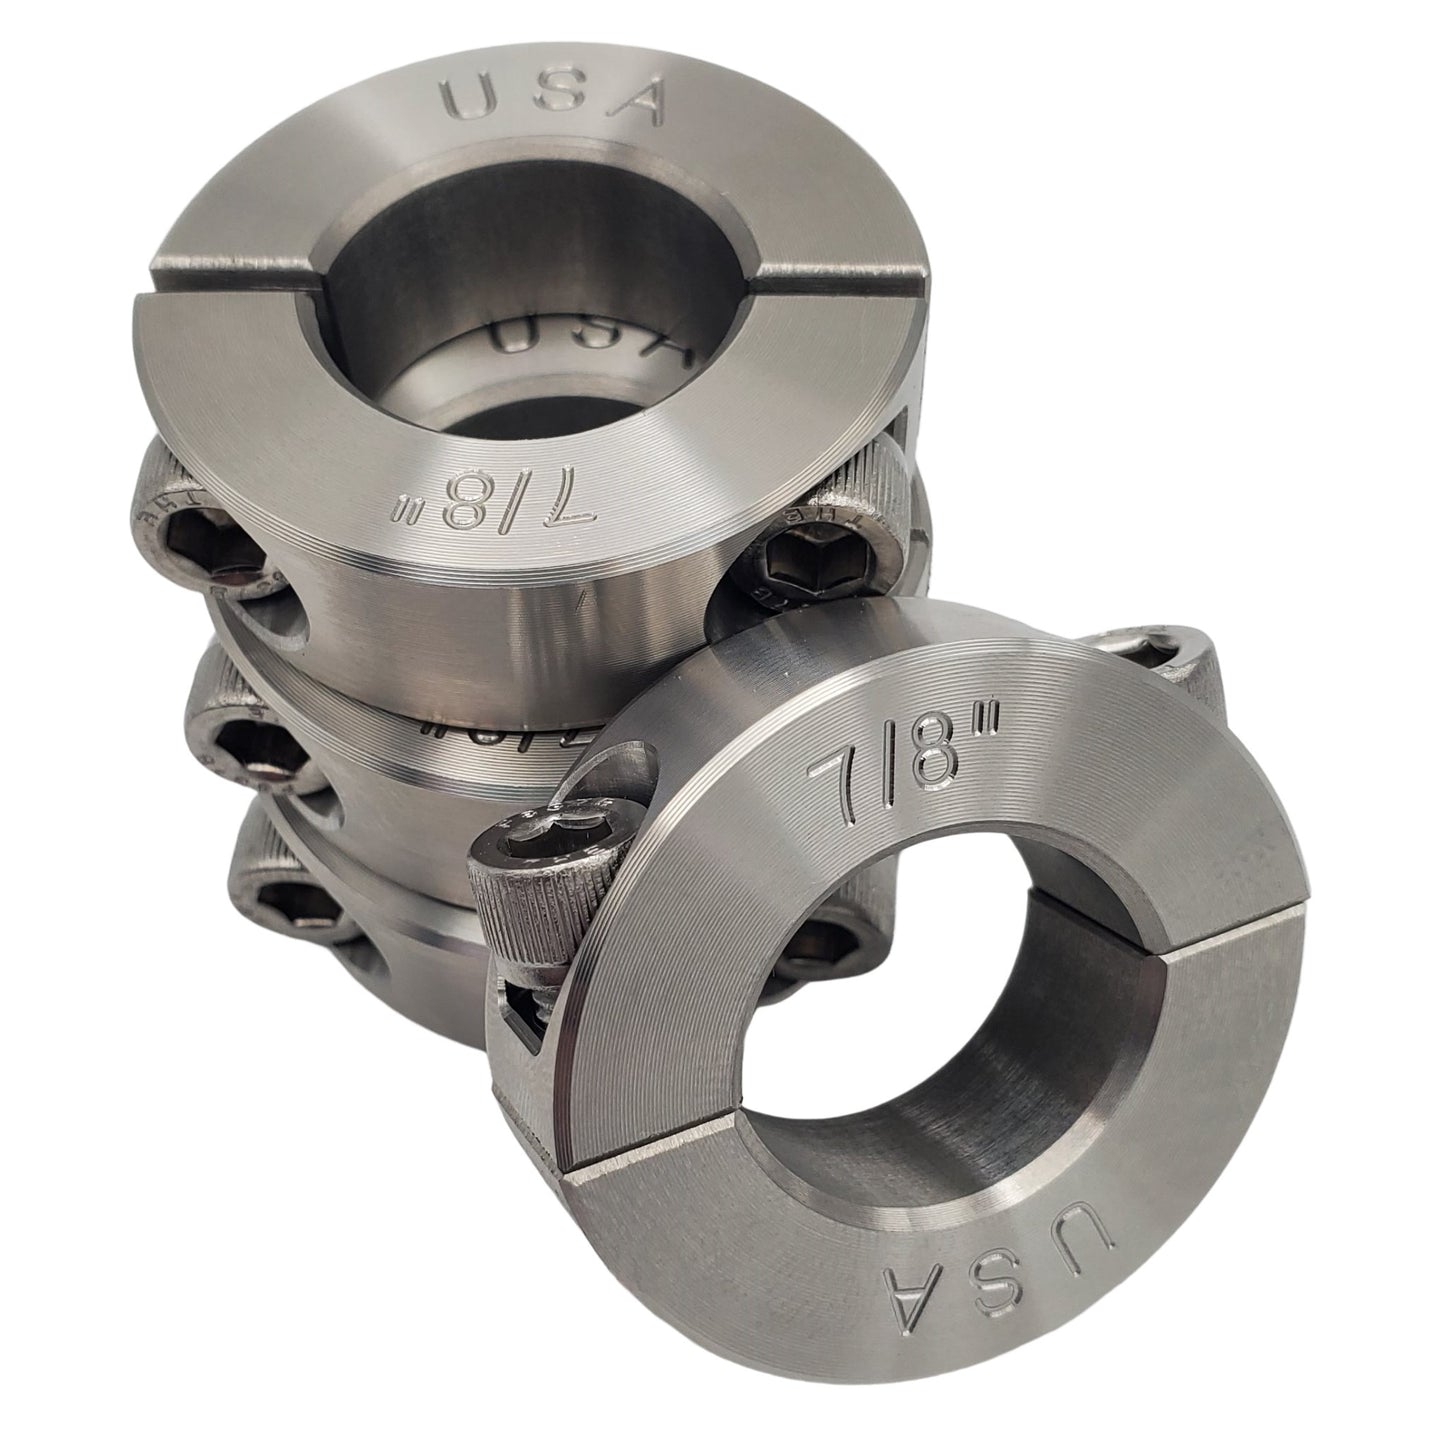 0.875" Diameter - Clamping Two Piece Shaft Collar - 303 Stainless Steel